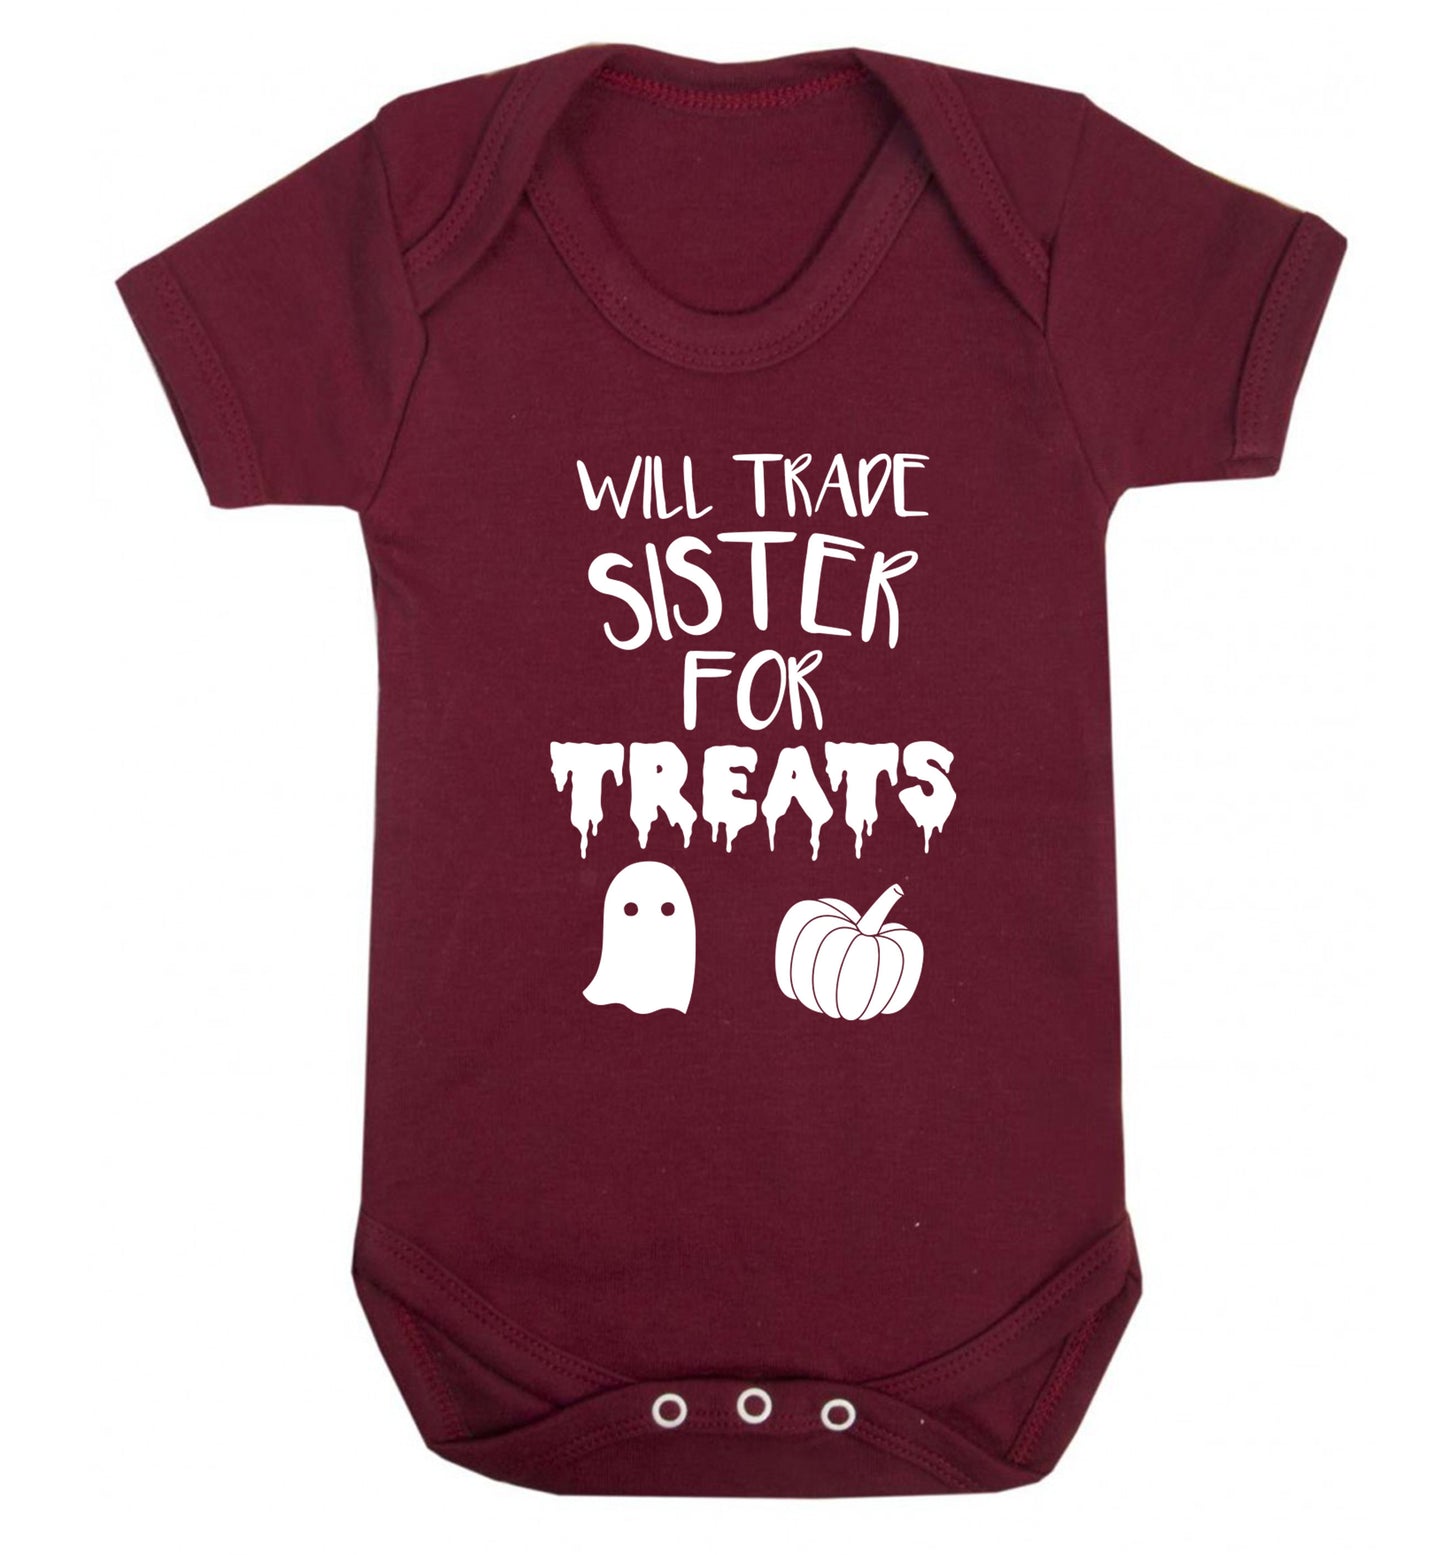 Will trade sister for treats Baby Vest maroon 18-24 months